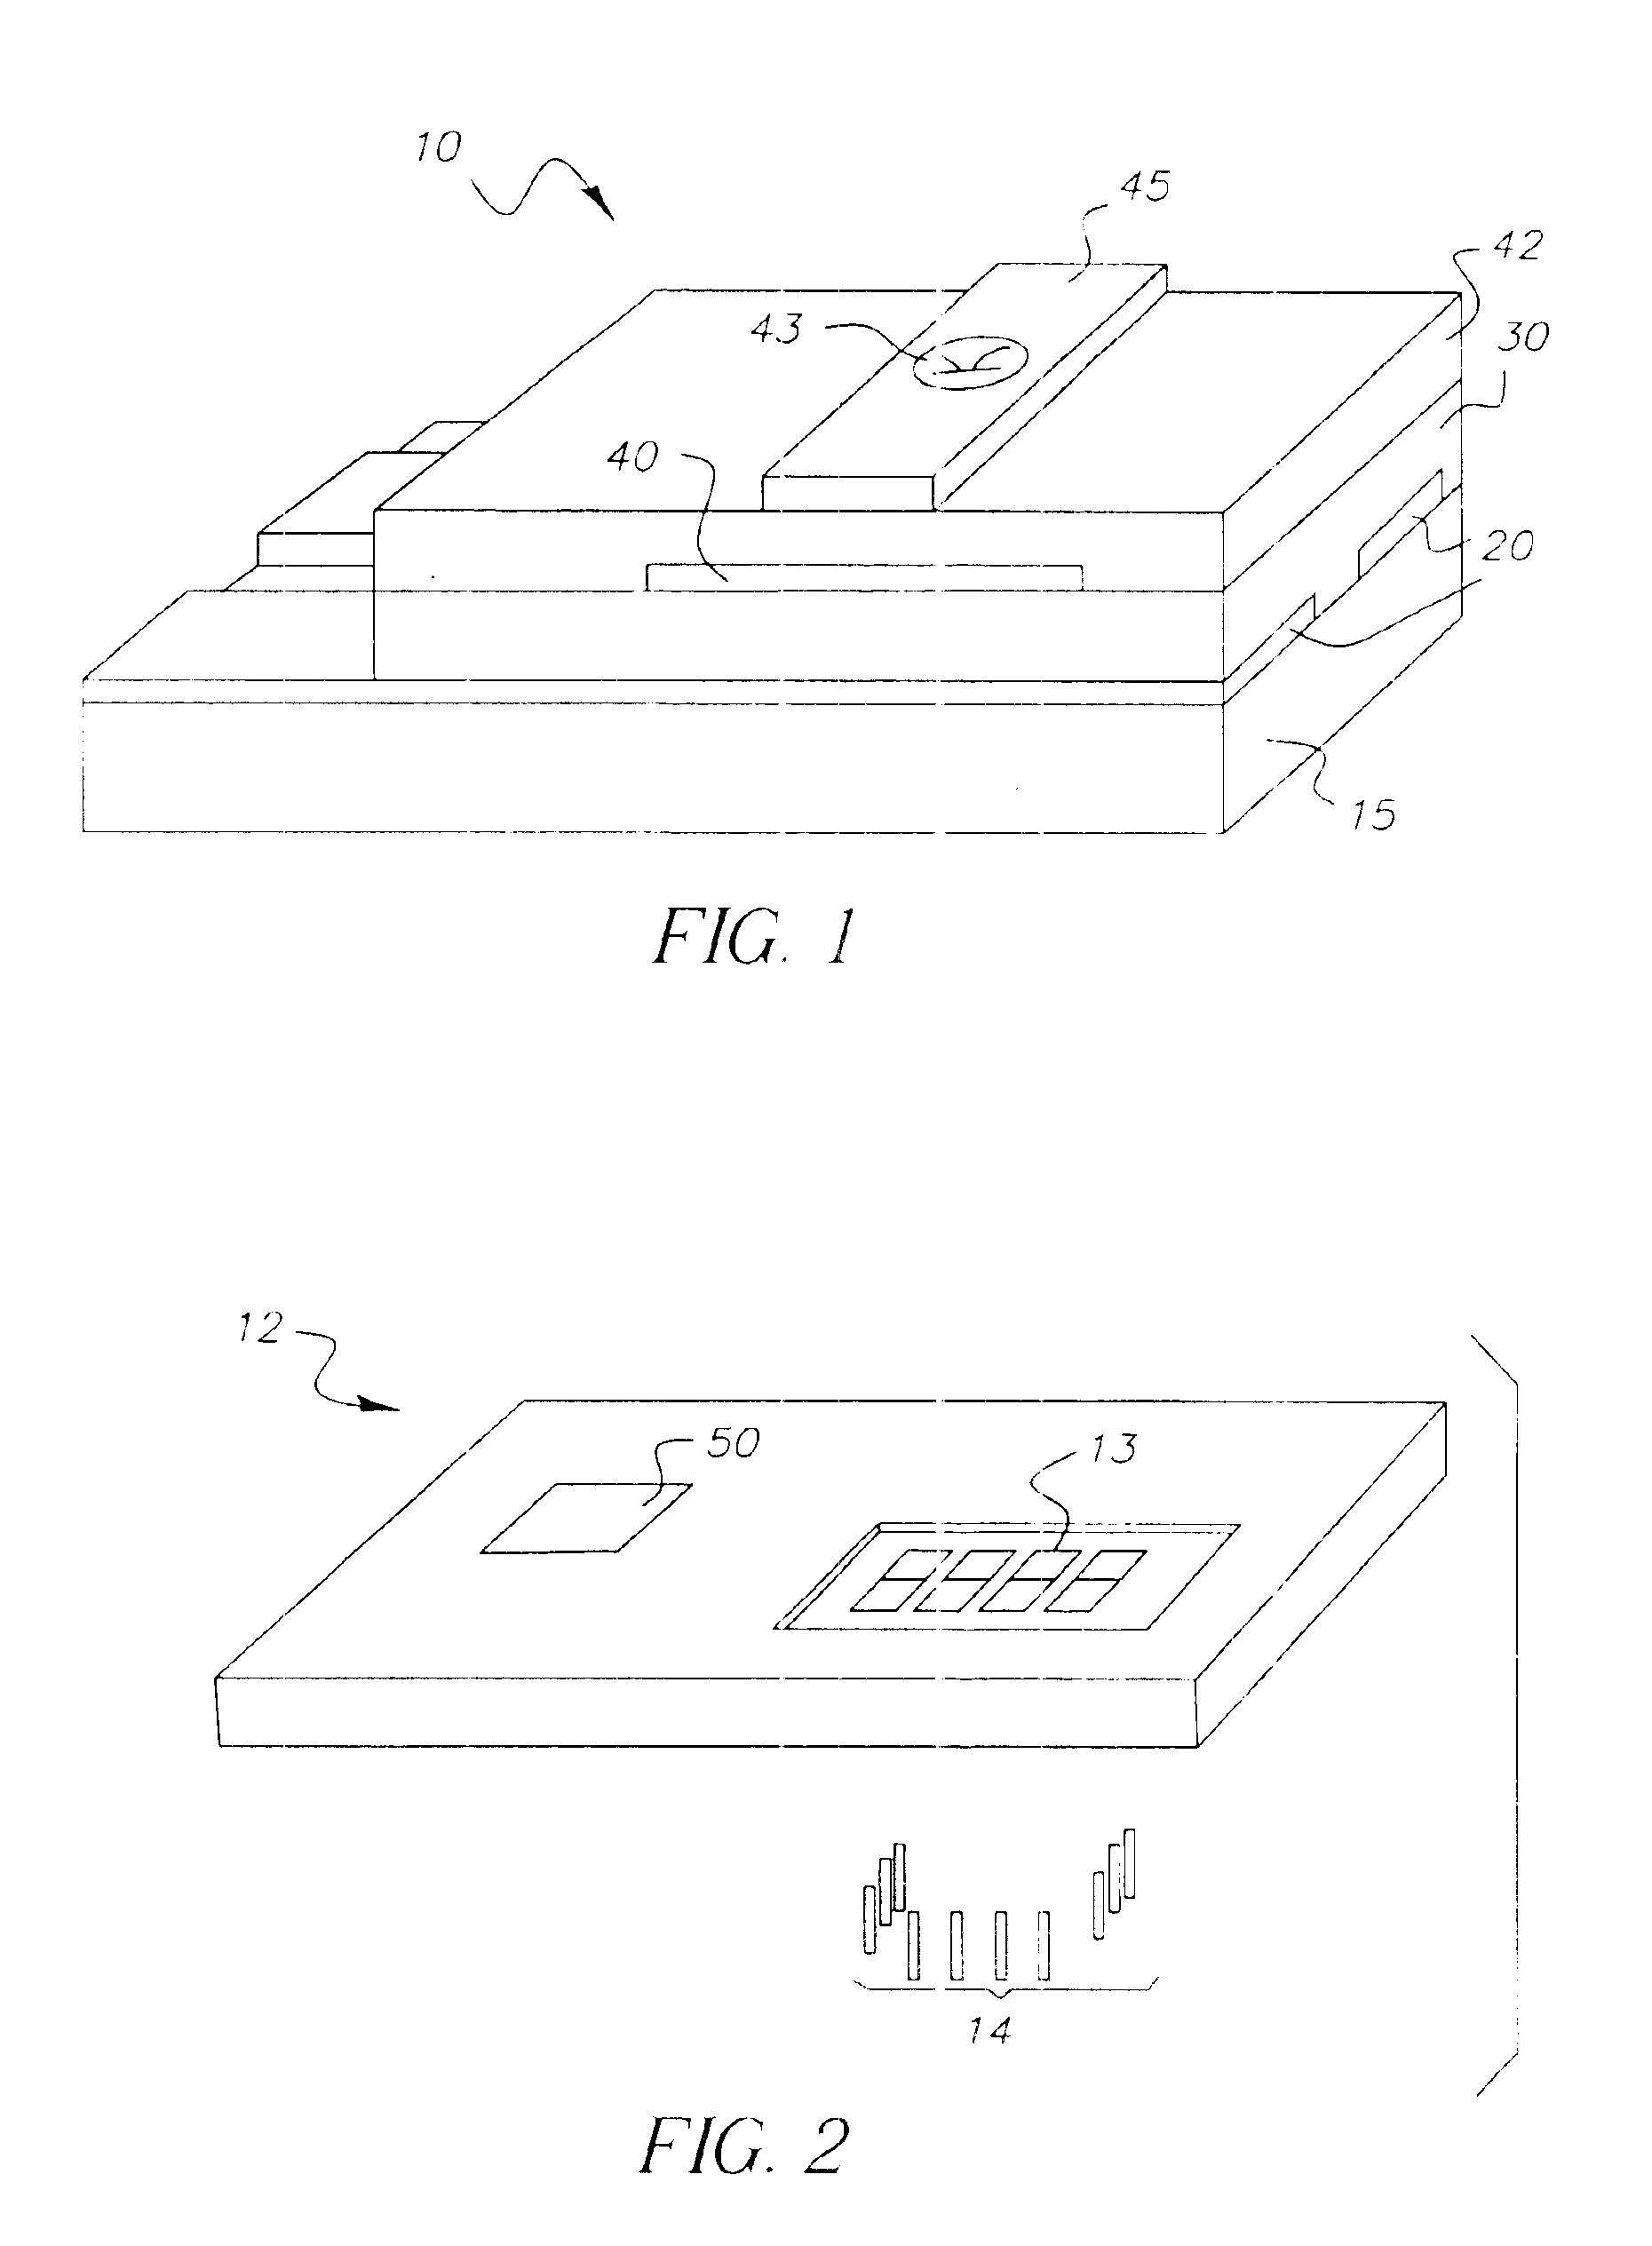 Transaction card with memory and polymer dispersed cholesteric liquid crystal display